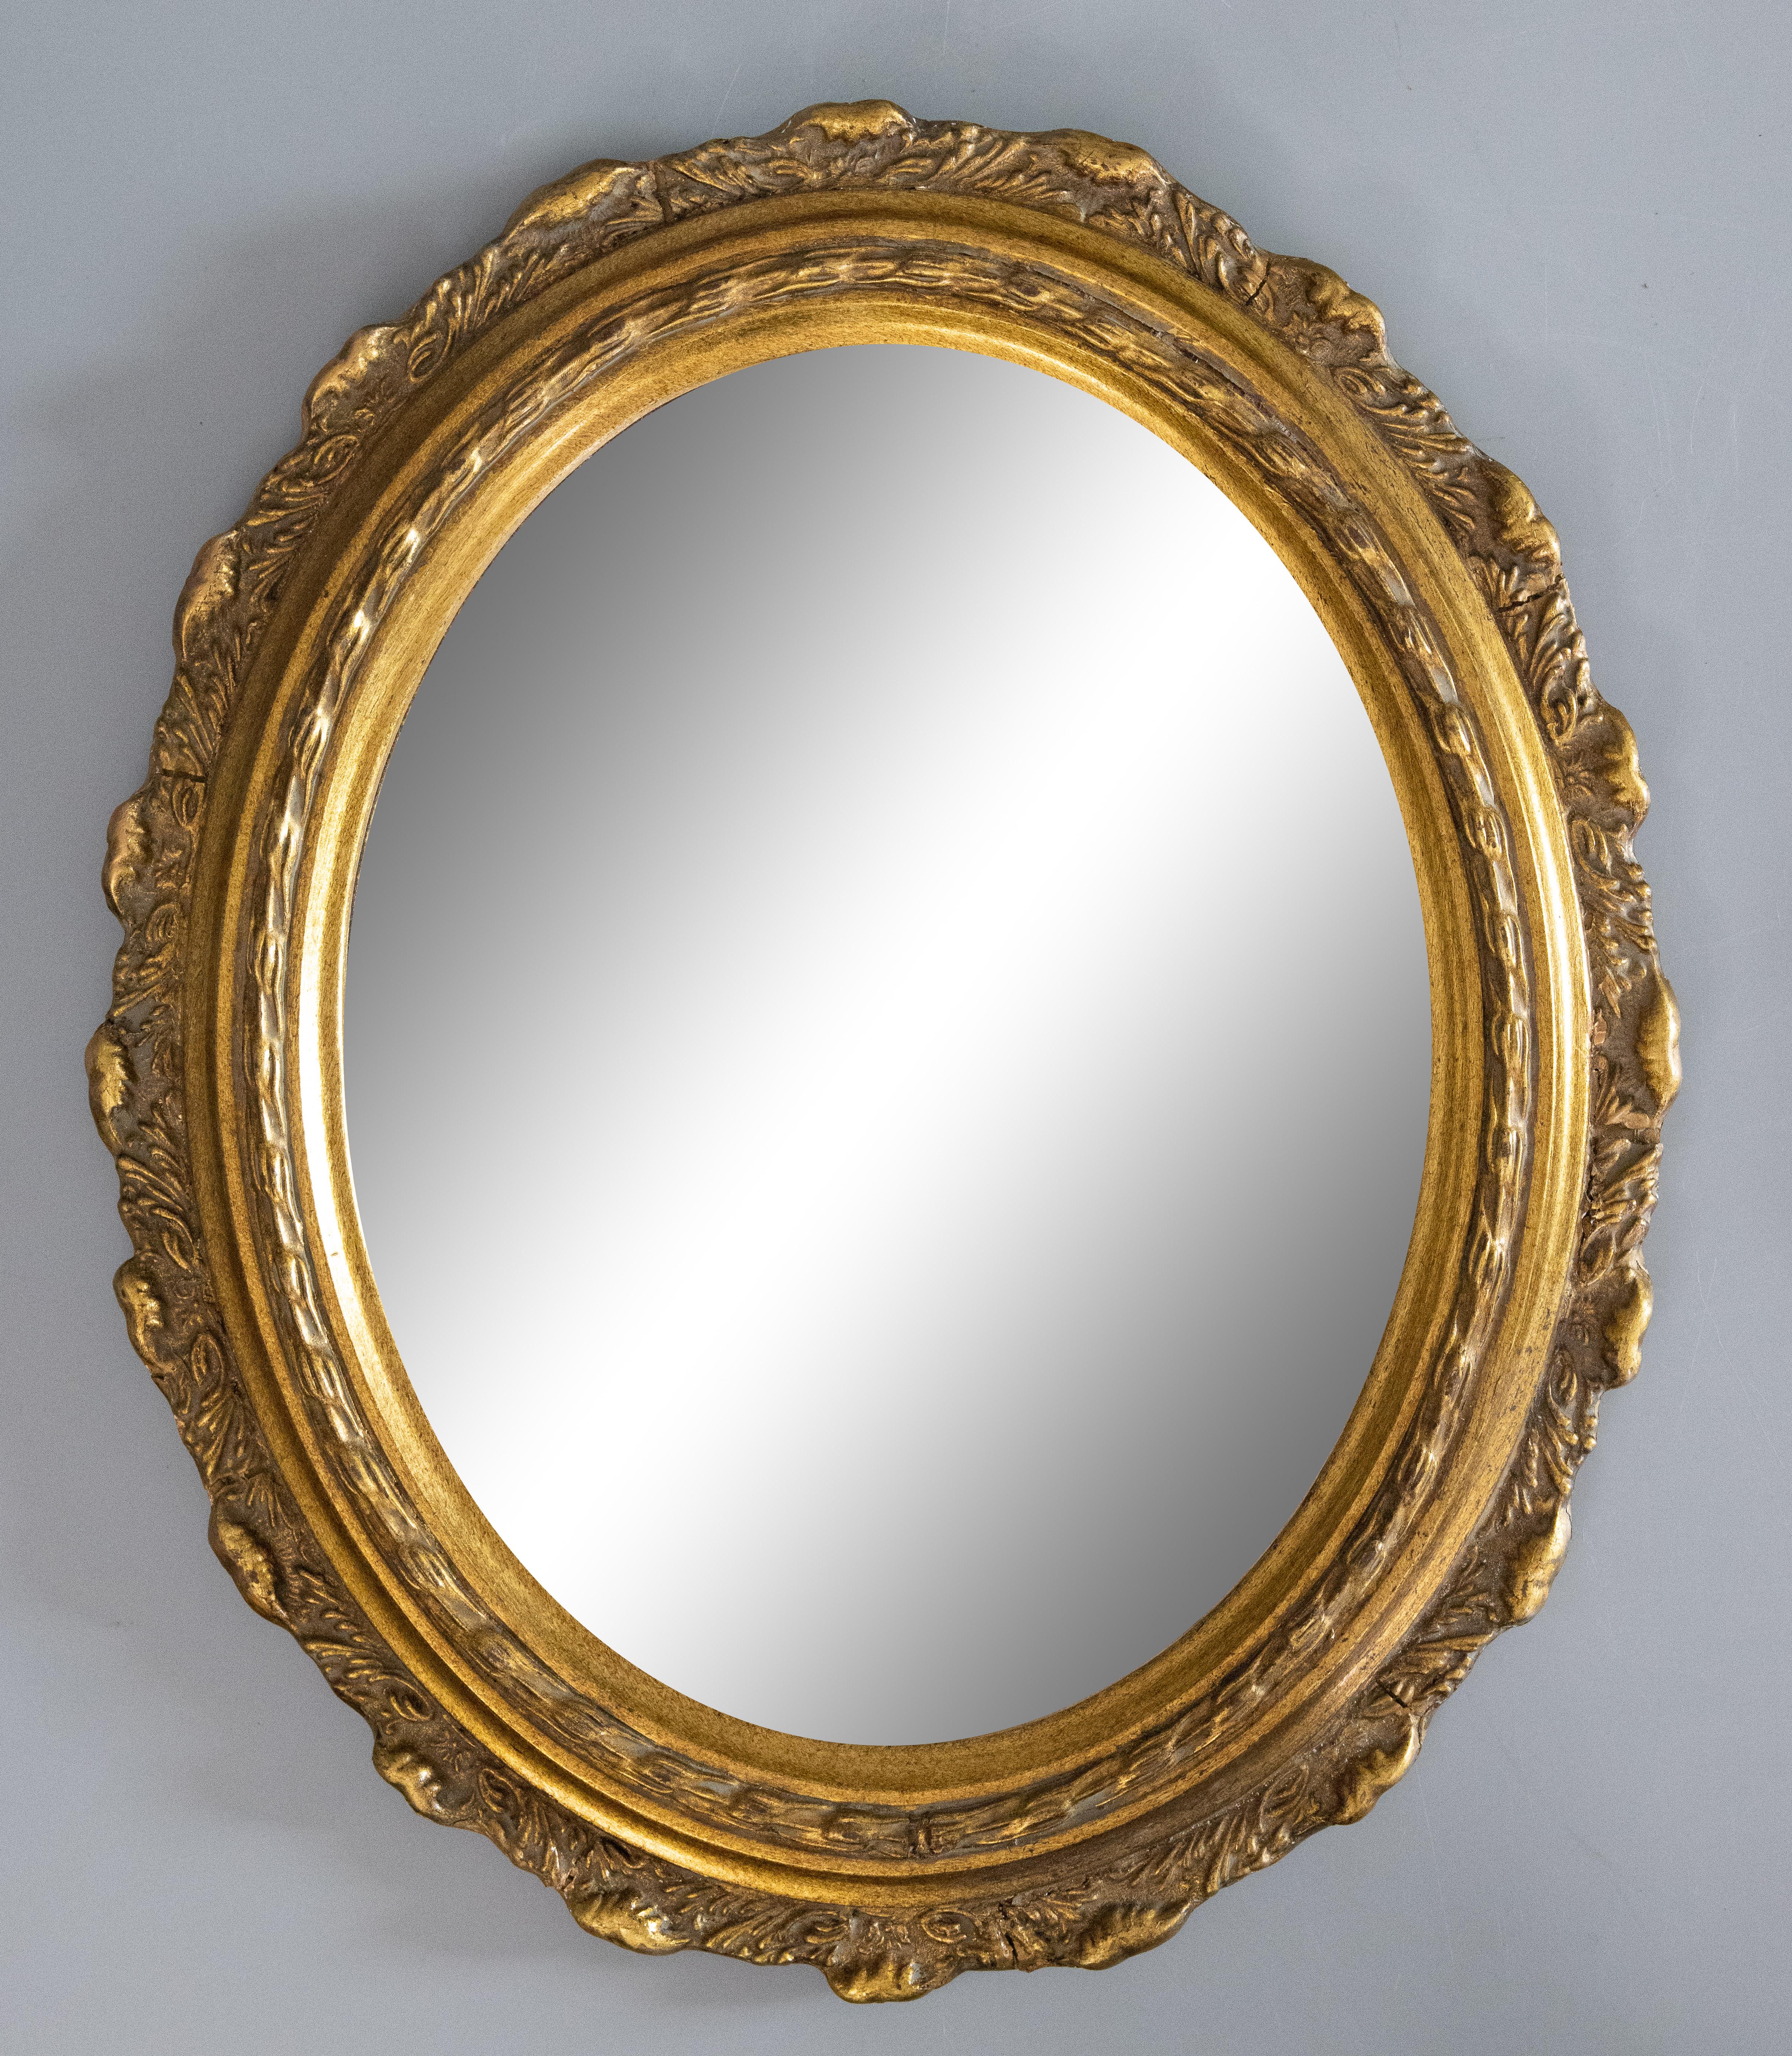 A gorgeous pair of vintage Italian gold ornate gilt wood and gesso mirrors, circa 1950. These would be a fabulous addition to any room.

Dimensions
15.5